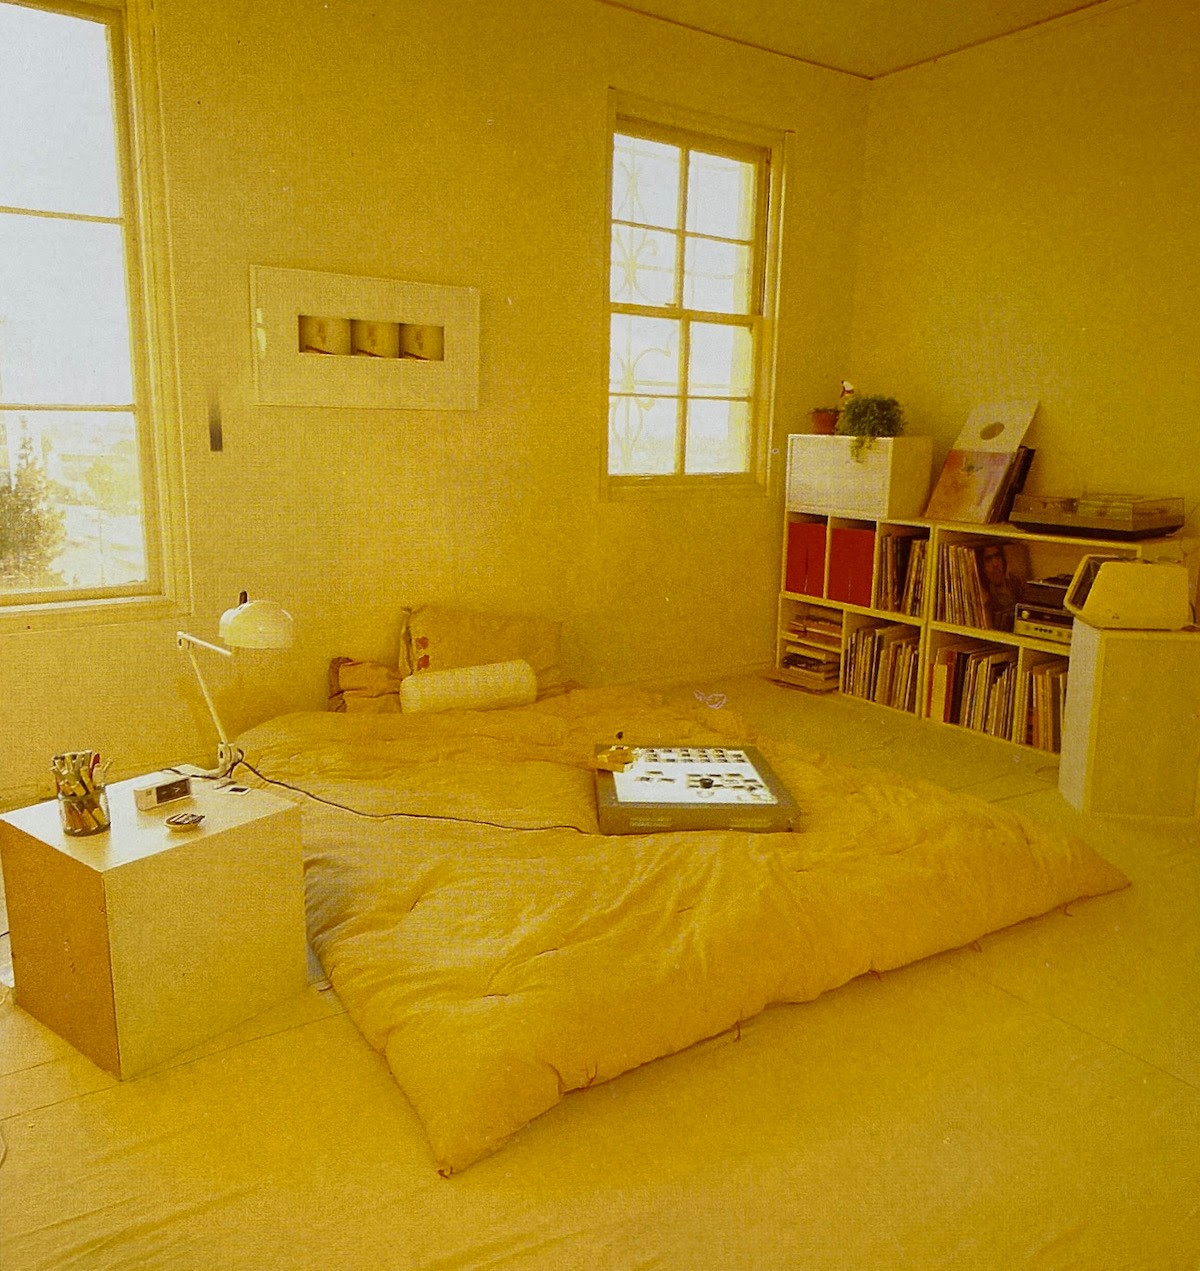 April Greiman and Jayme Odgers Los Angeles home circa 1979